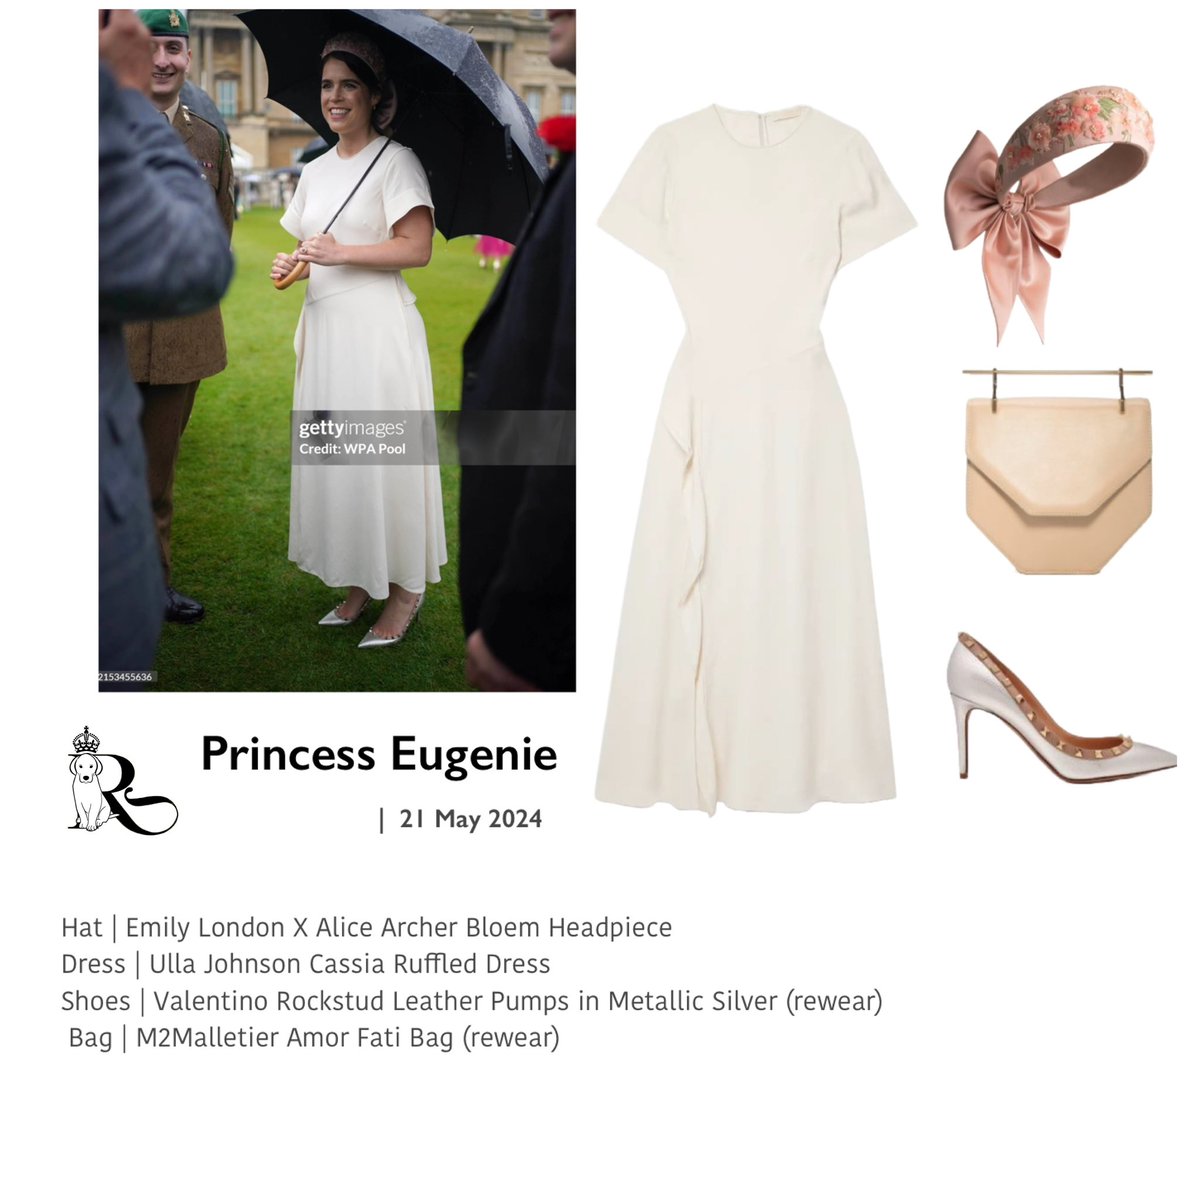 Princesses Beatrice & Eugenie also attended The Sovereign's Garden Party, at Buckingham Palace today 💕 #PrincessEugenie